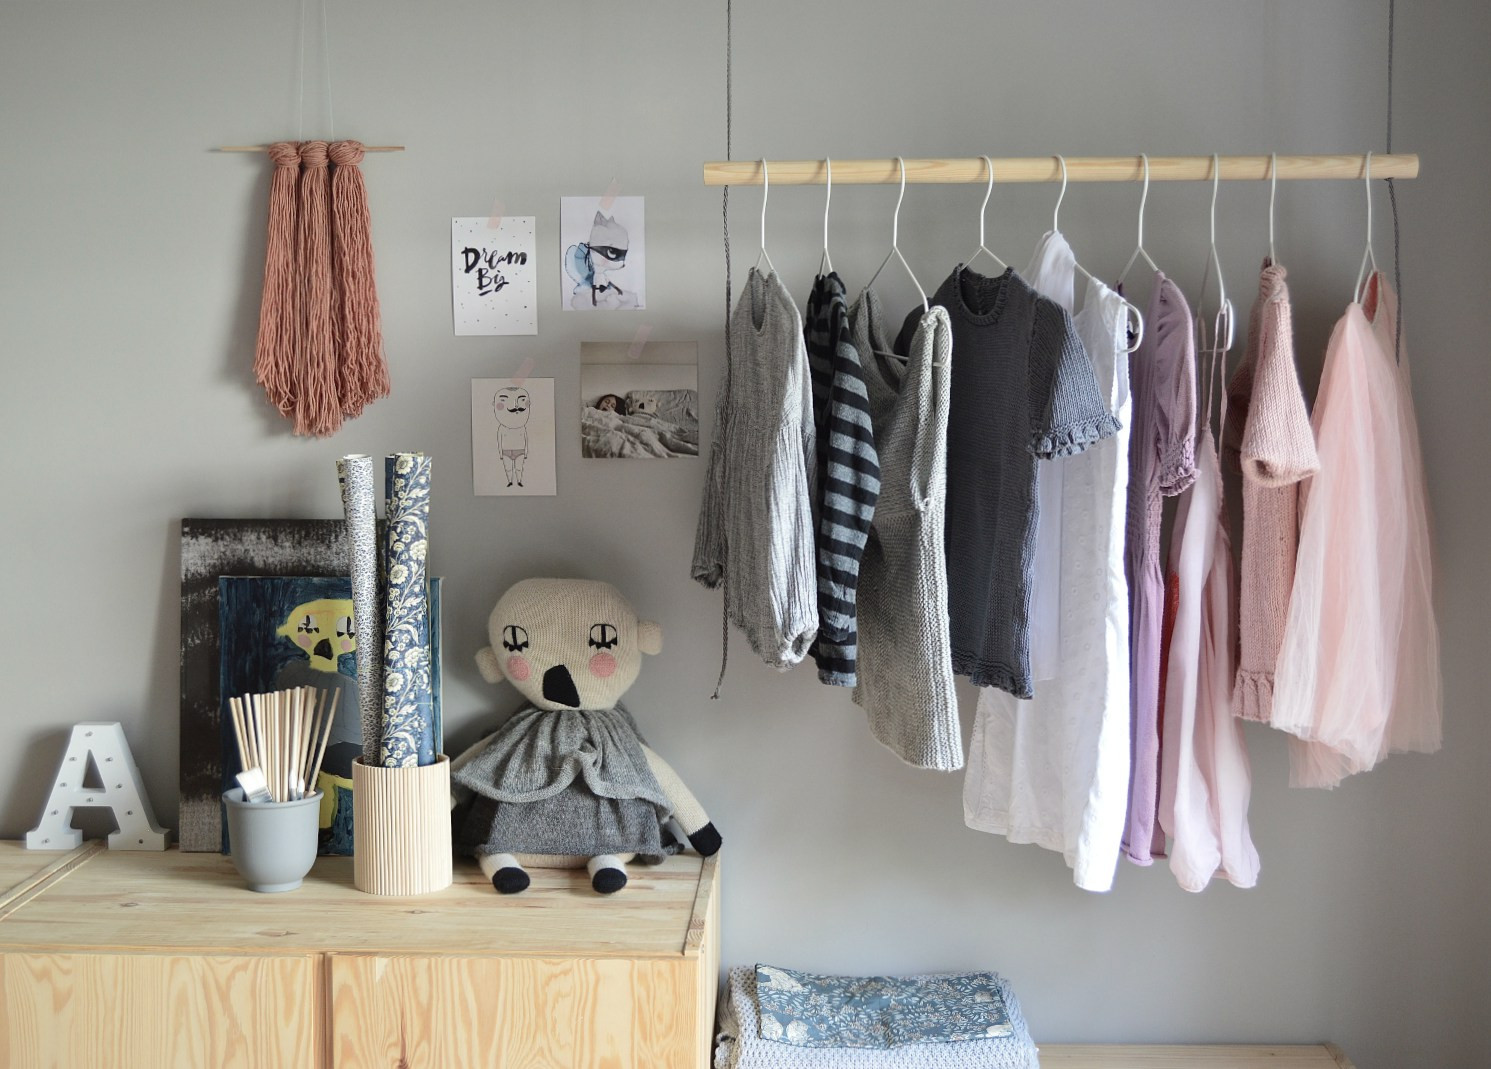 DIY Hanging Clothing Rack
 Hang on With this DIY hanging clothes rack DIY home